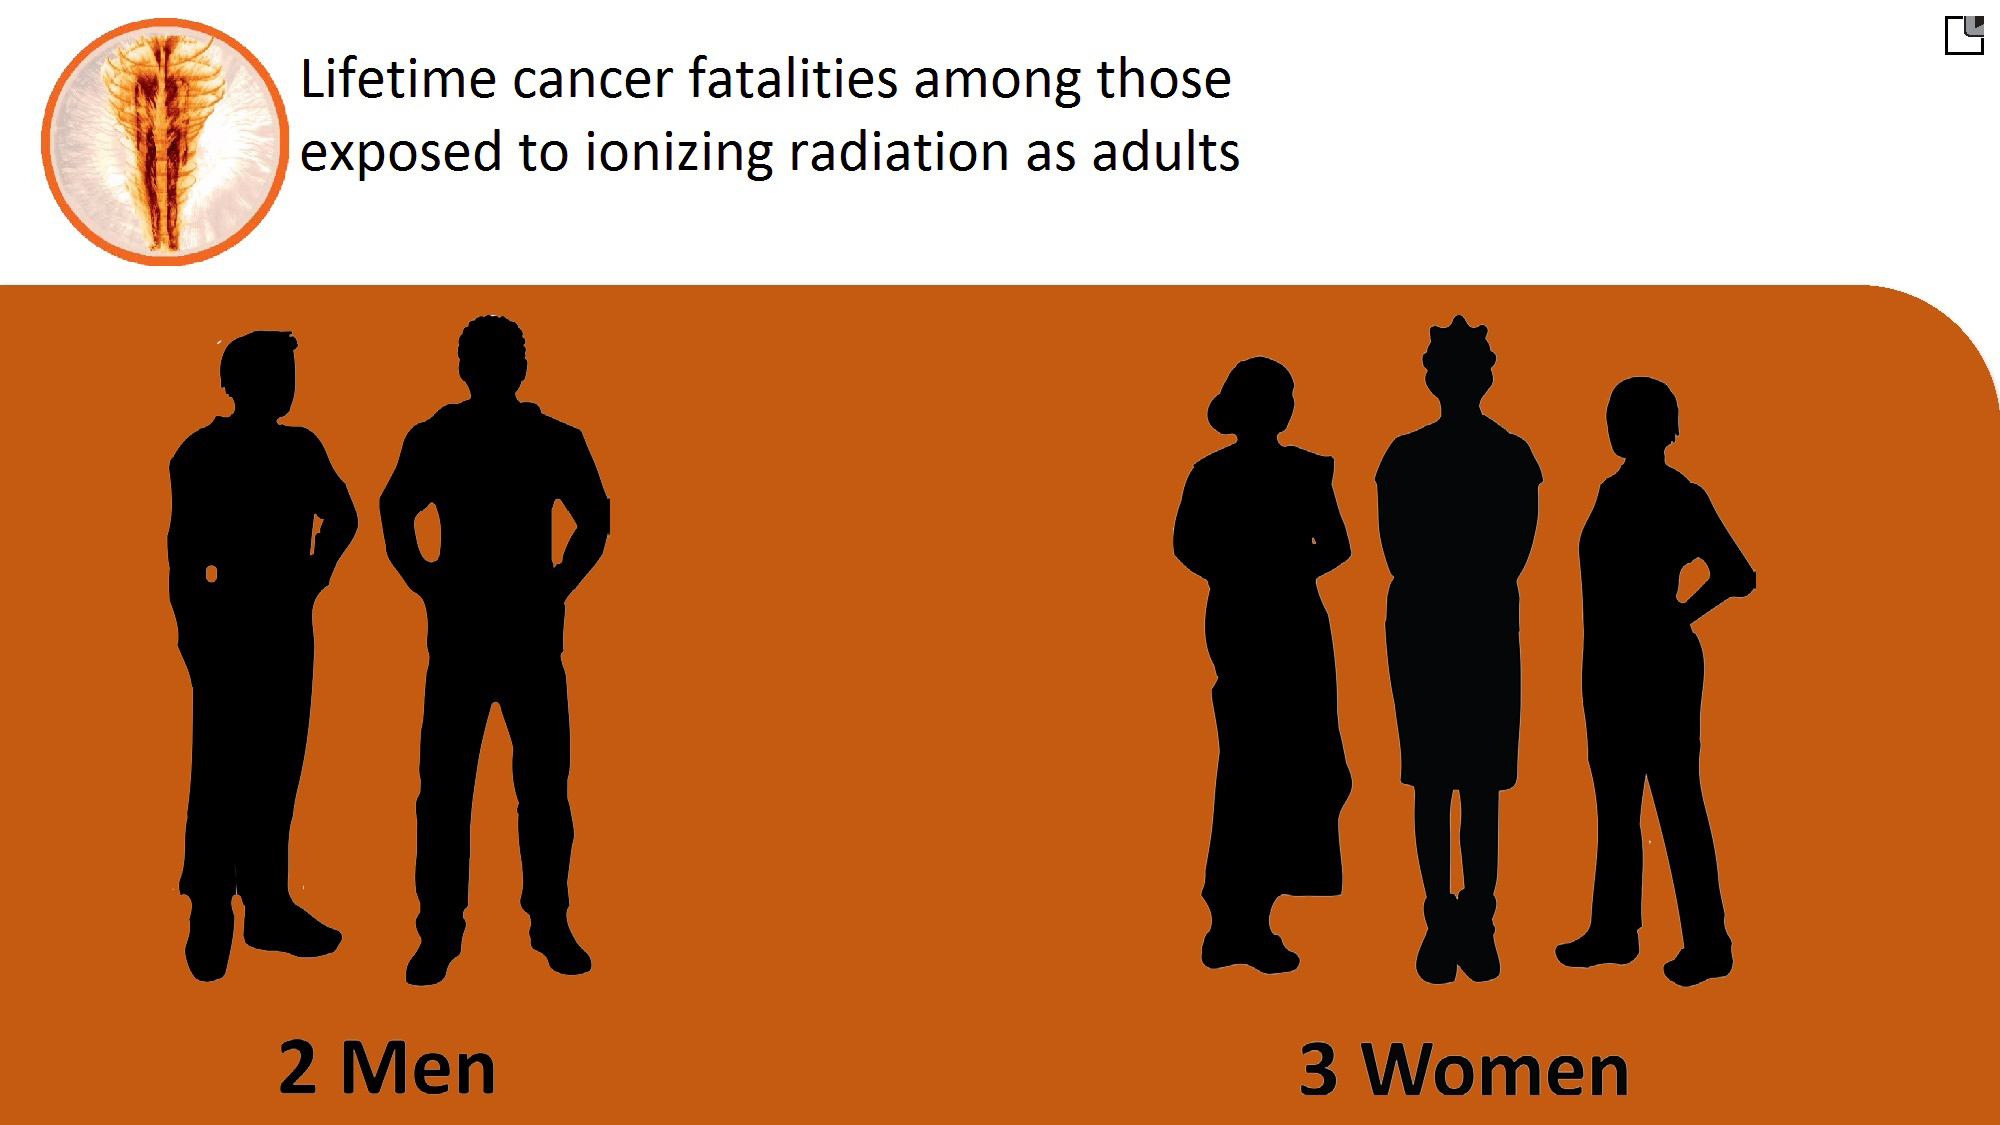 A nuclear accident involving a fully-loaded MOX core could double these numbers: 6 women for every 4 men.